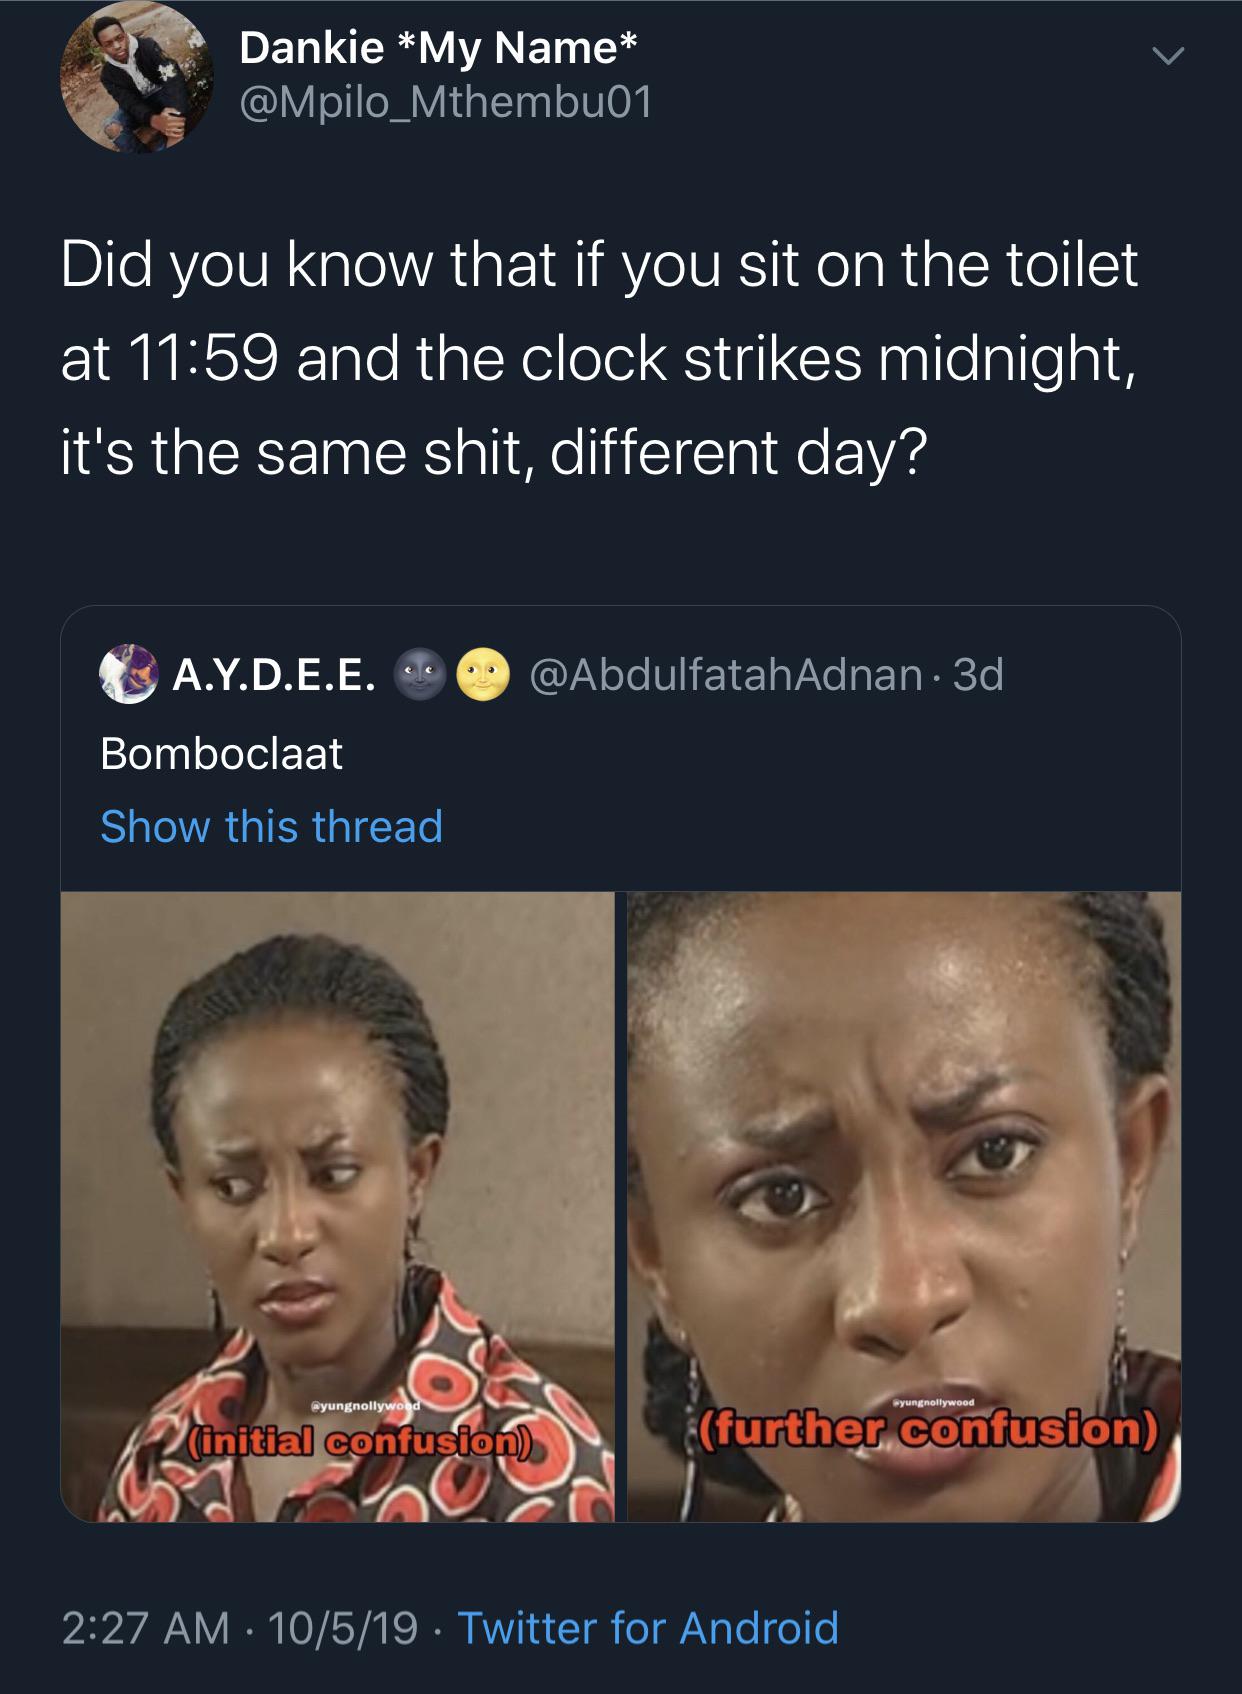 black twitter - Dankie My Name Did you know that if you sit on the toilet at and the clock strikes midnight, it's the same shit, different day? 3d, A.Y.D.E.E. Bomboclaat Show this thread Pyungnollywood further confusion initial confusion Al 10519. Twitter